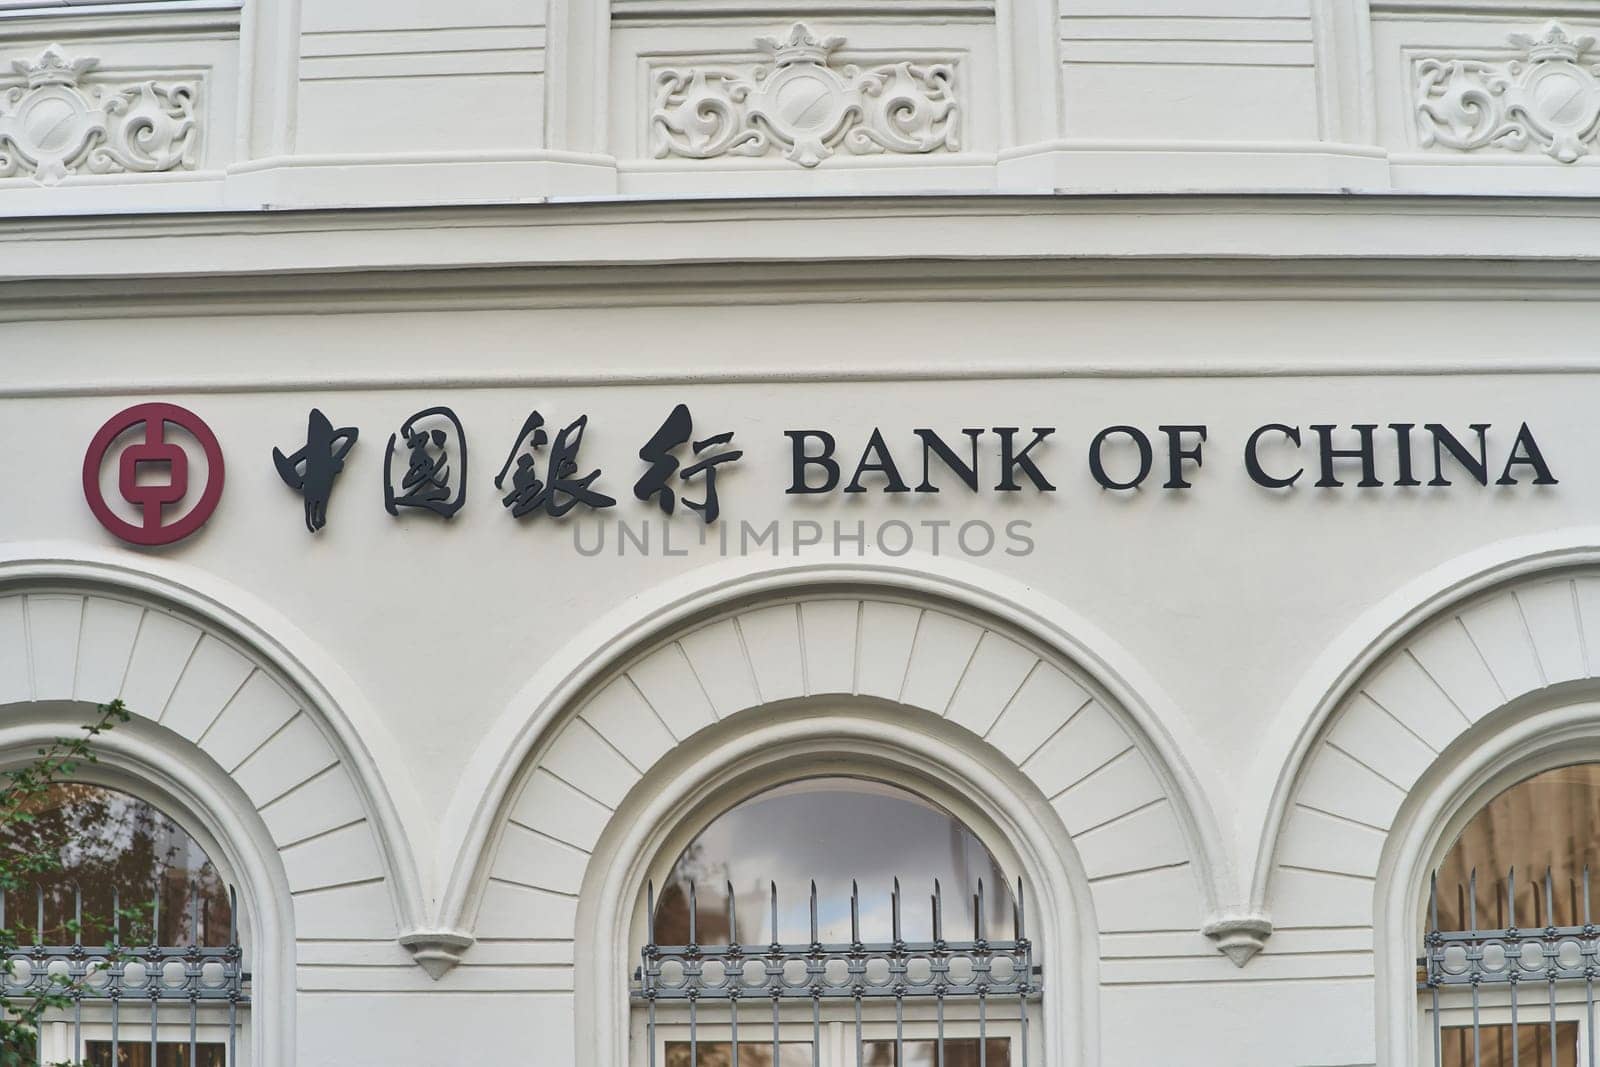 The Bank of China is a prominent fixture on the facade of a building, showcasing stunning architecture and a distinctive font on the exterior wall